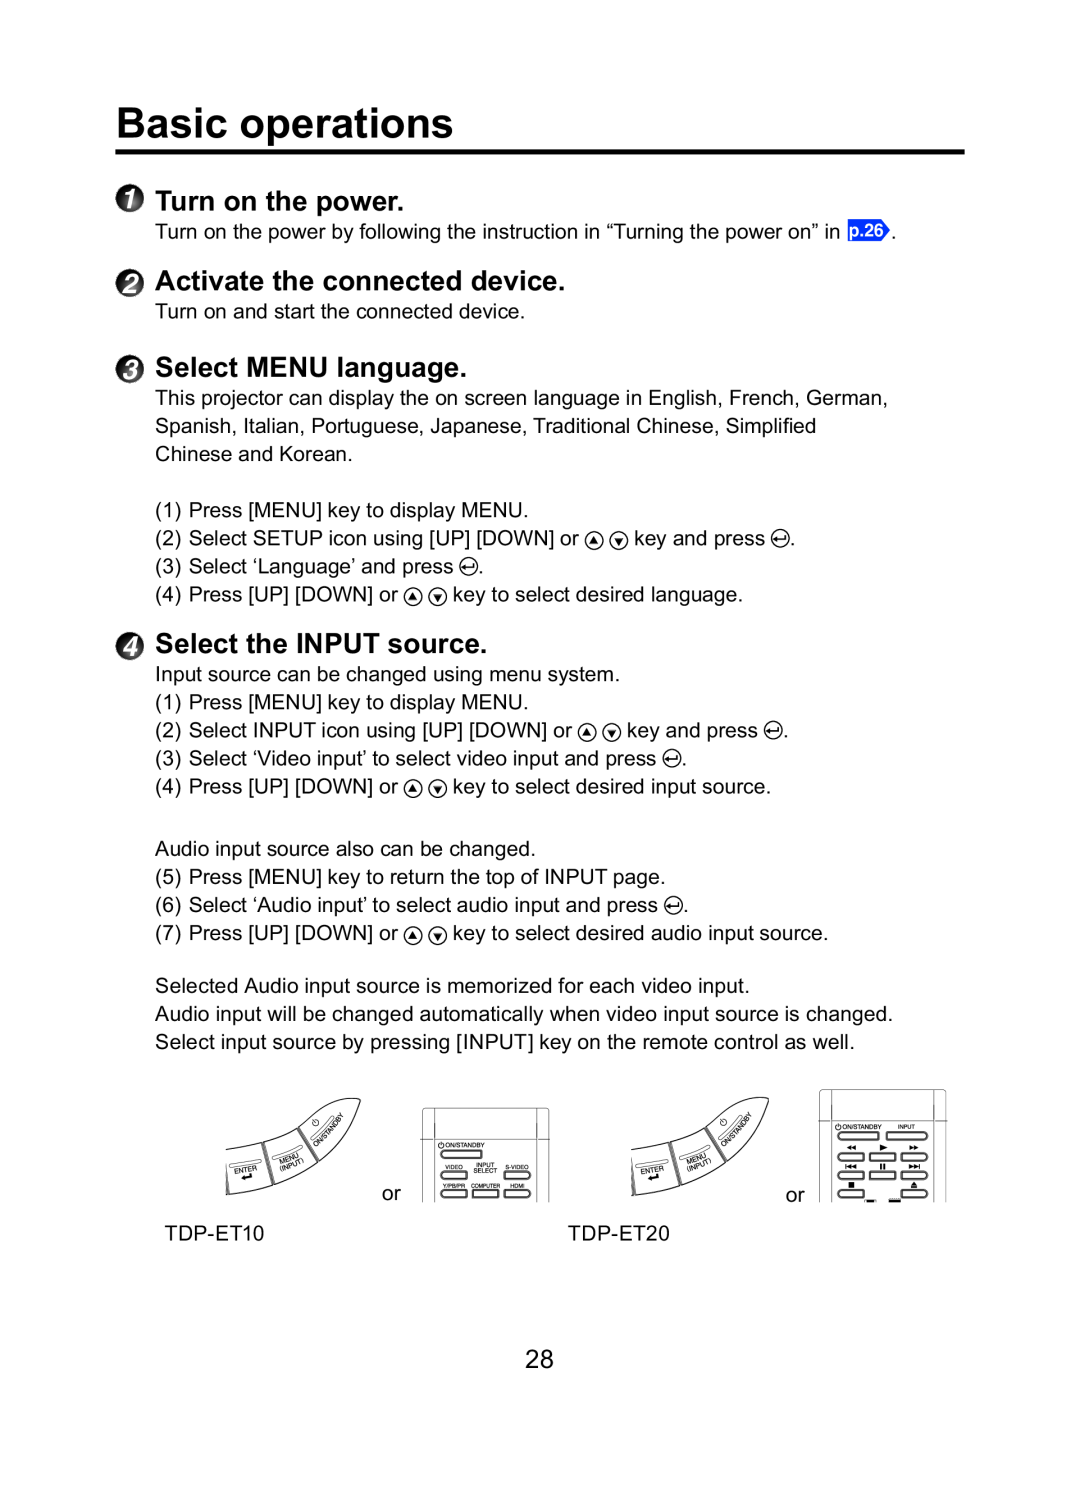 Toshiba TDP-ET10 owner manual Basic operations, Turn on the power, Activate the connected device, Select MENU language 